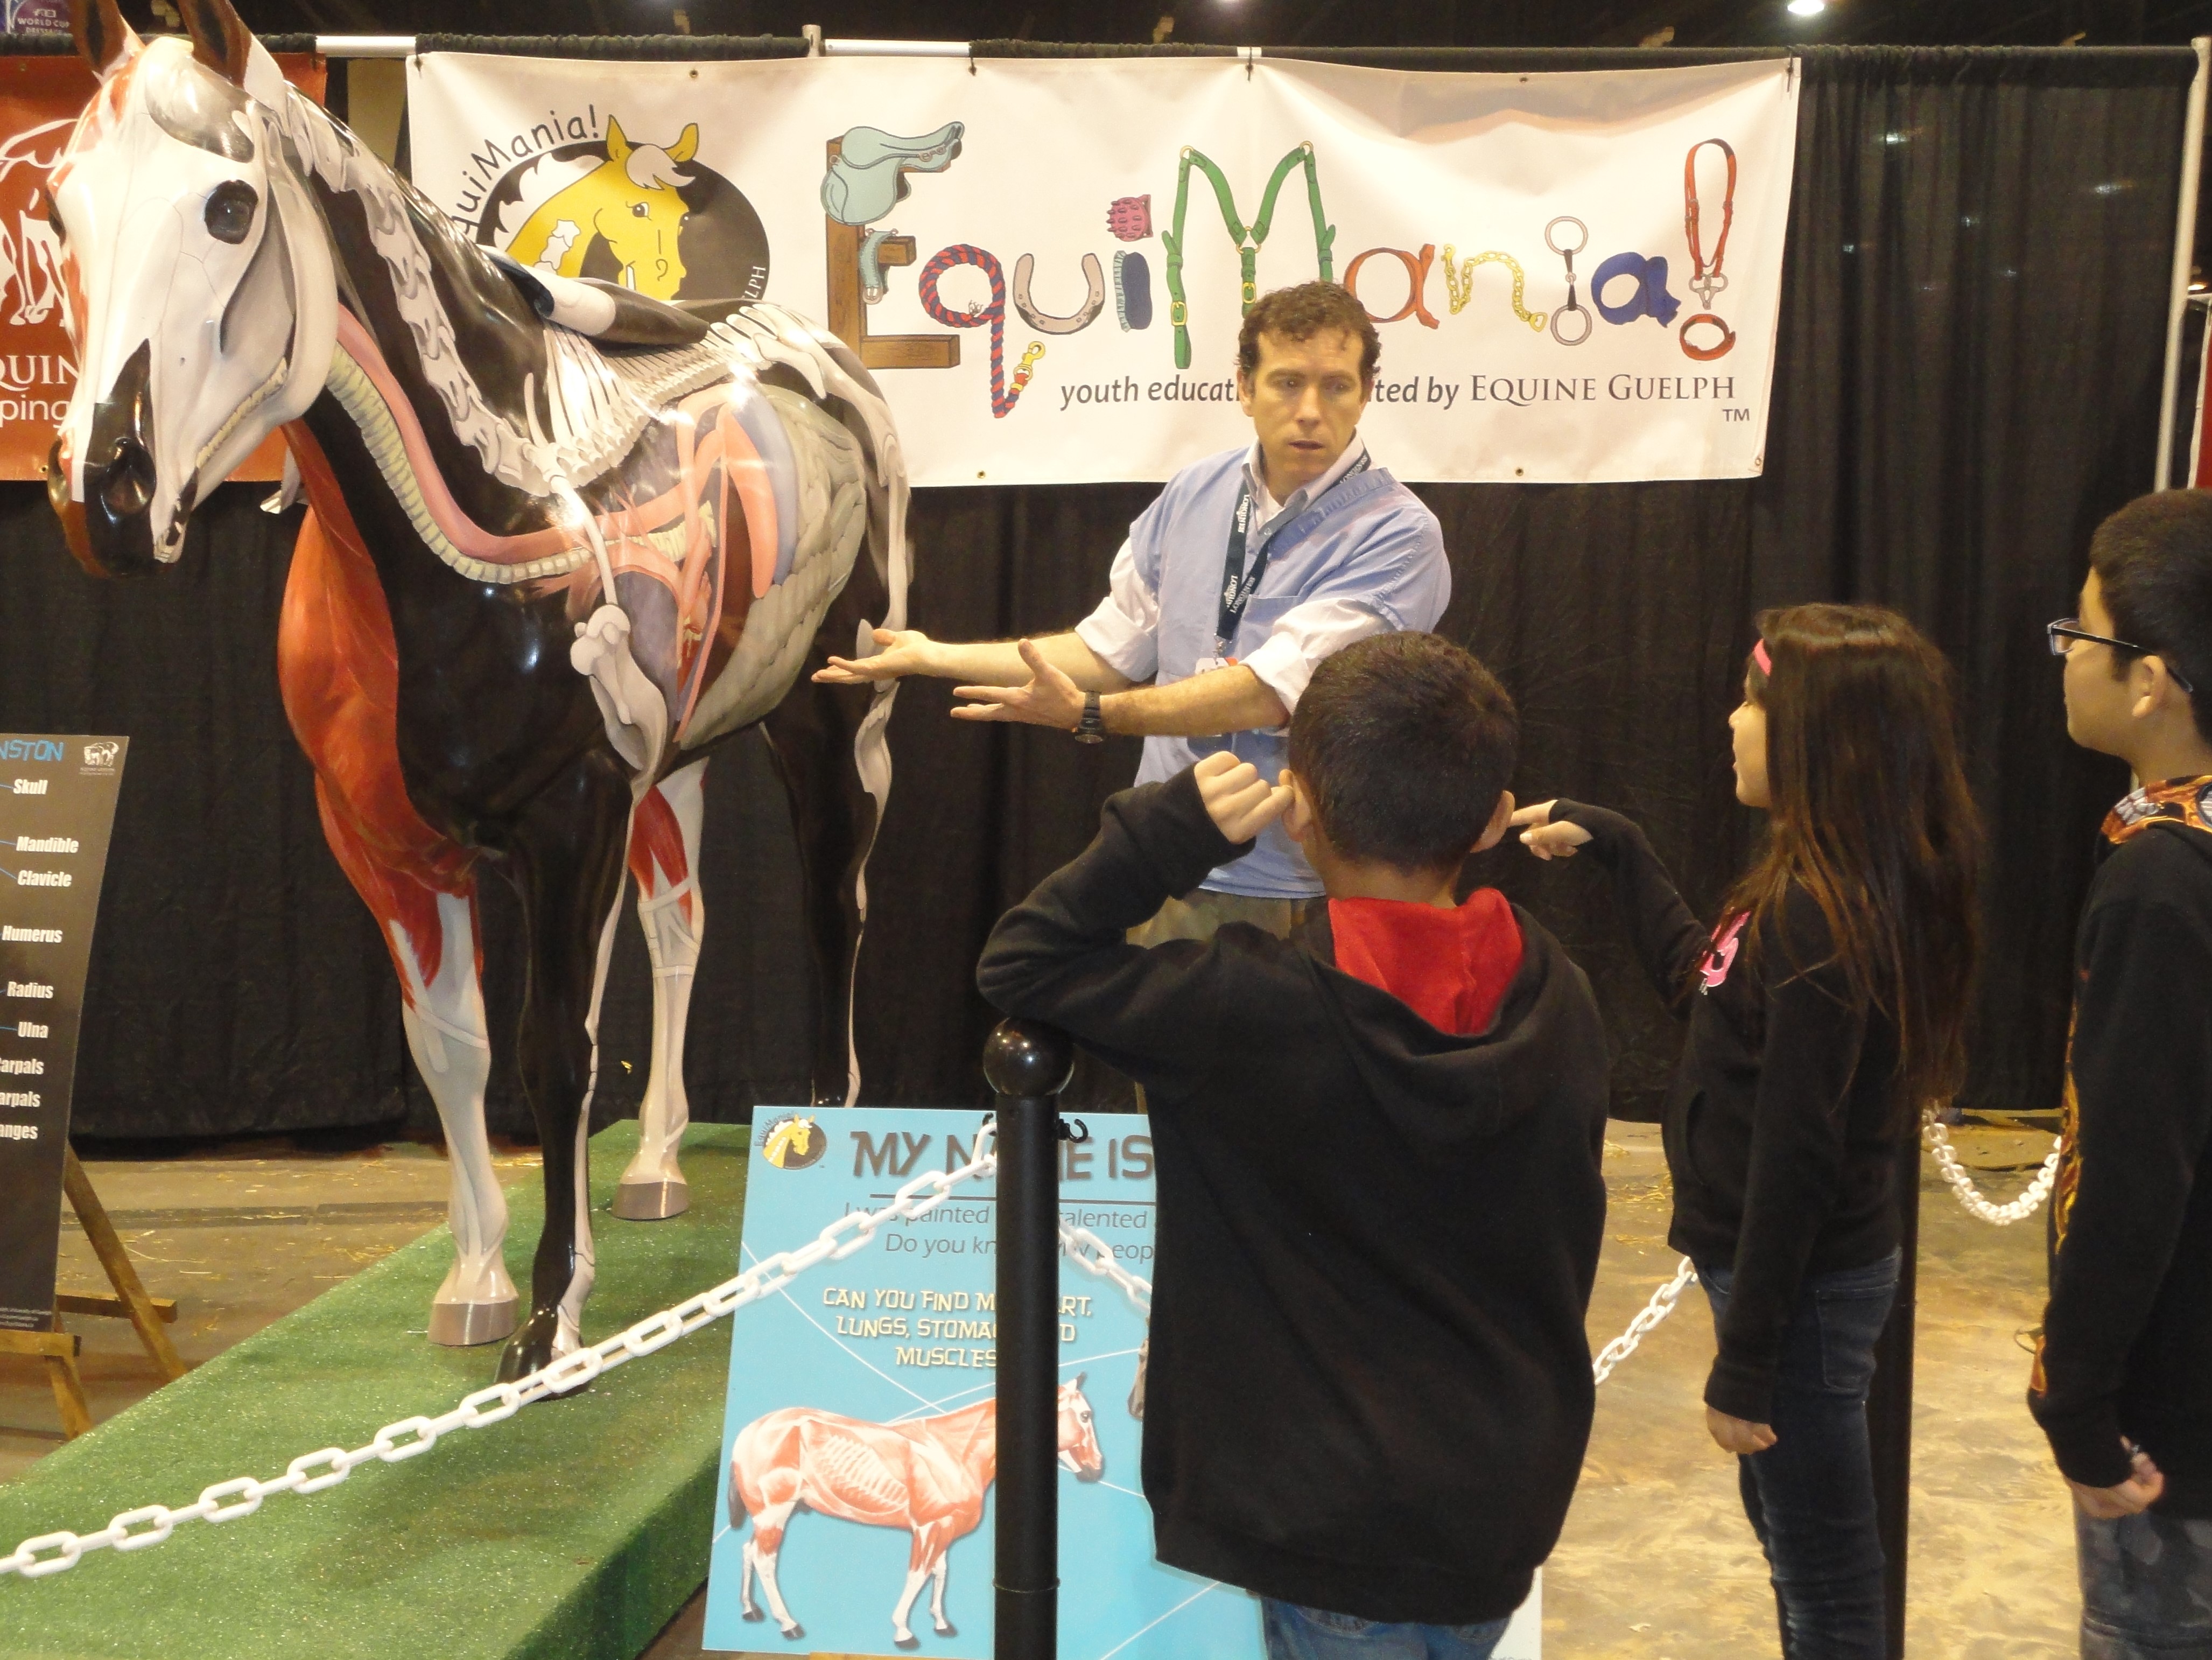 Glenn Jackson, DVM, explains the anatomy of a horse at the FEI World Cup equine expo in Omaha in May. Veterinary Technology students from the Nebraska College of Technical Agriculture assist during the expo. (Photo by Jackie Bellamy-Zions, Equine Guelph)